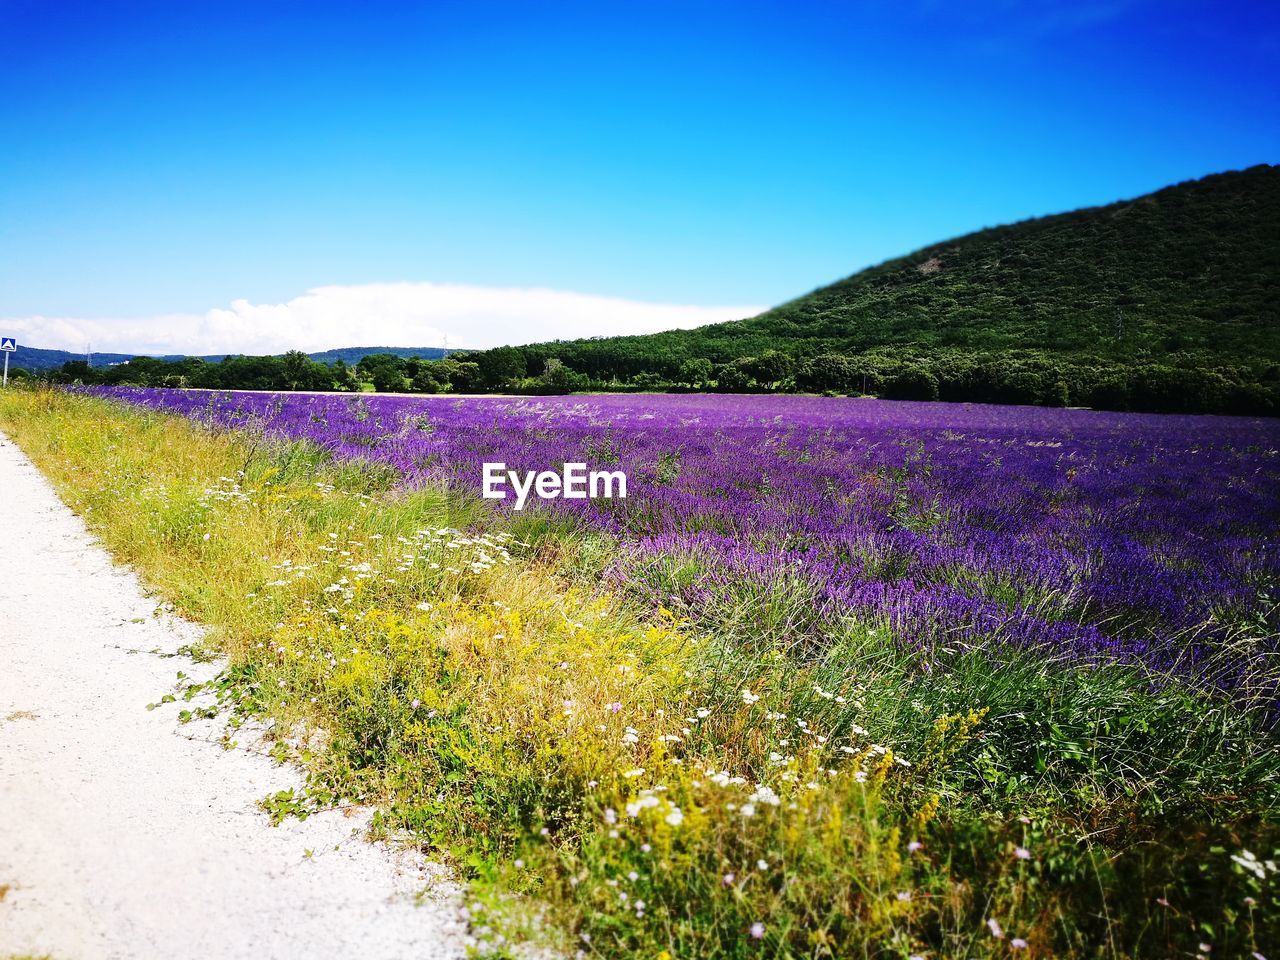 SCENIC VIEW OF LAVENDER FIELD AGAINST SKY